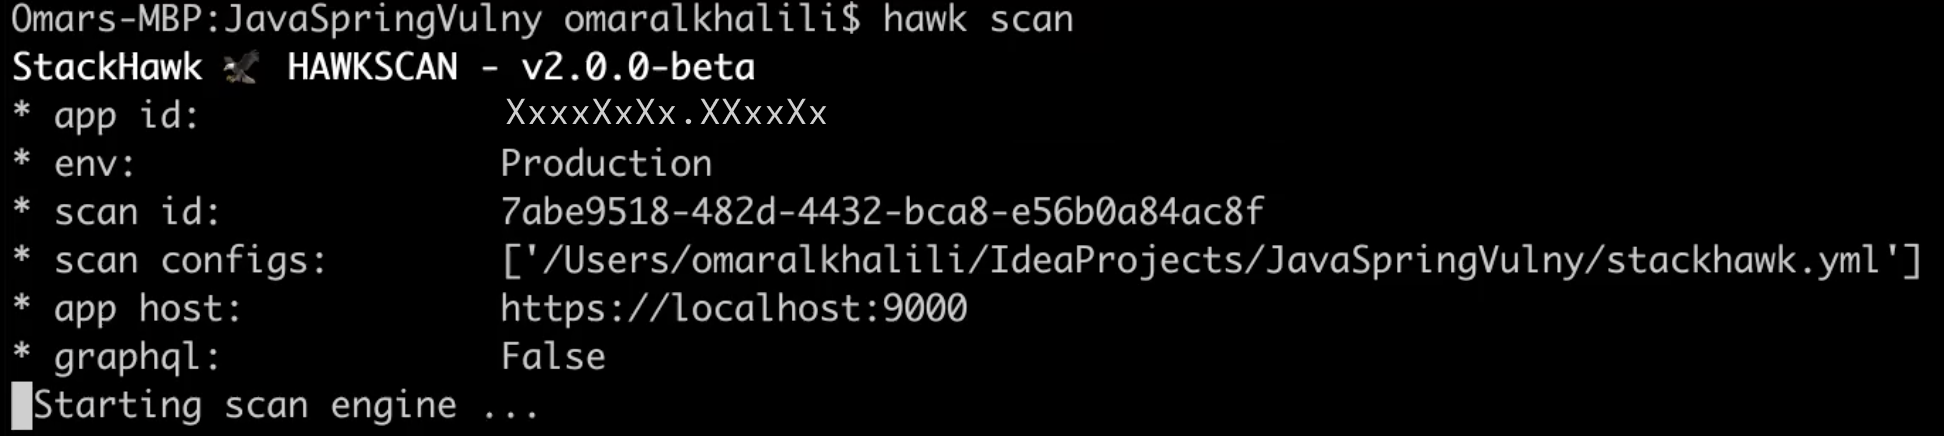 Getting Started with the New StackHawk CLI - Hawk Scan Pic image